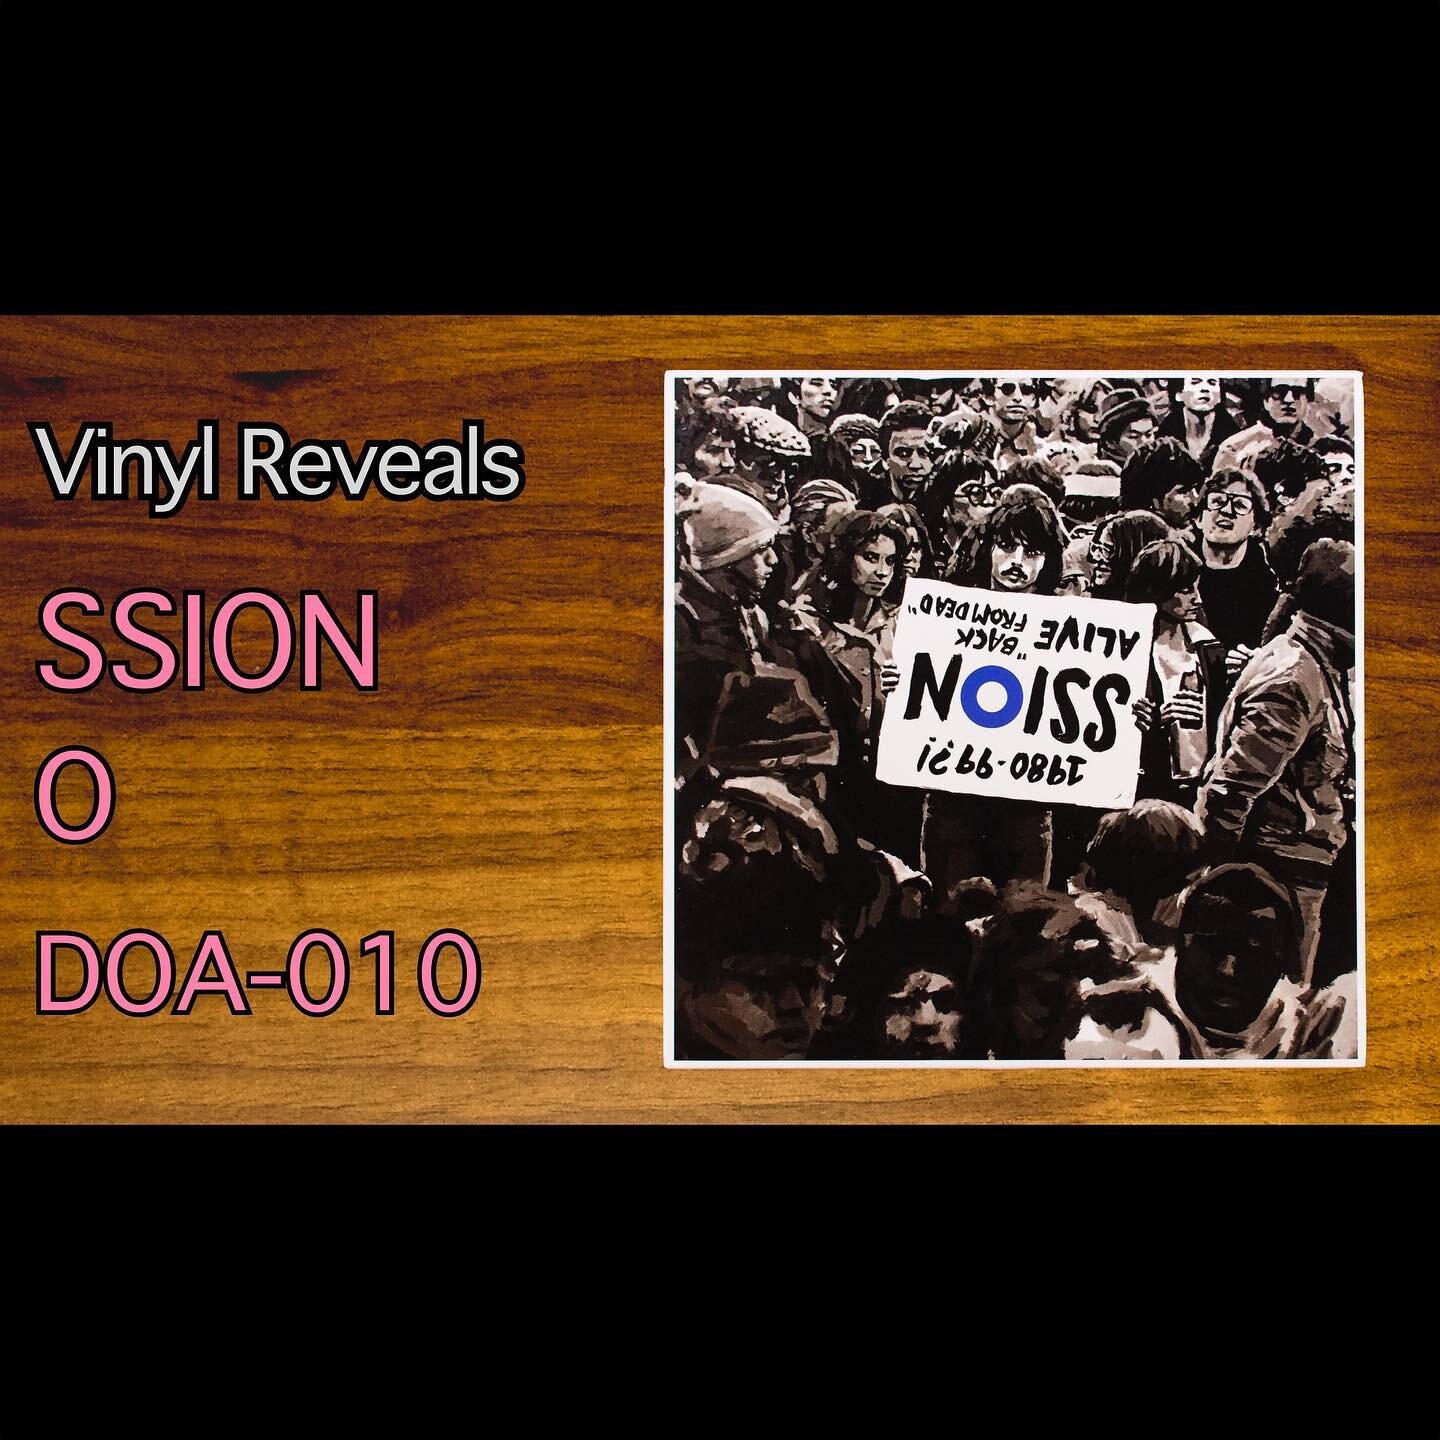 Today we are looking at O by SSION. Video is now live on the Vinyl Reveals YouTube channel. Link in profile.

#vinylReveal #vinyl #vinylcollection #vinylrecords #records #vinylReveals #vinylcommunity @ssion_official #ssion